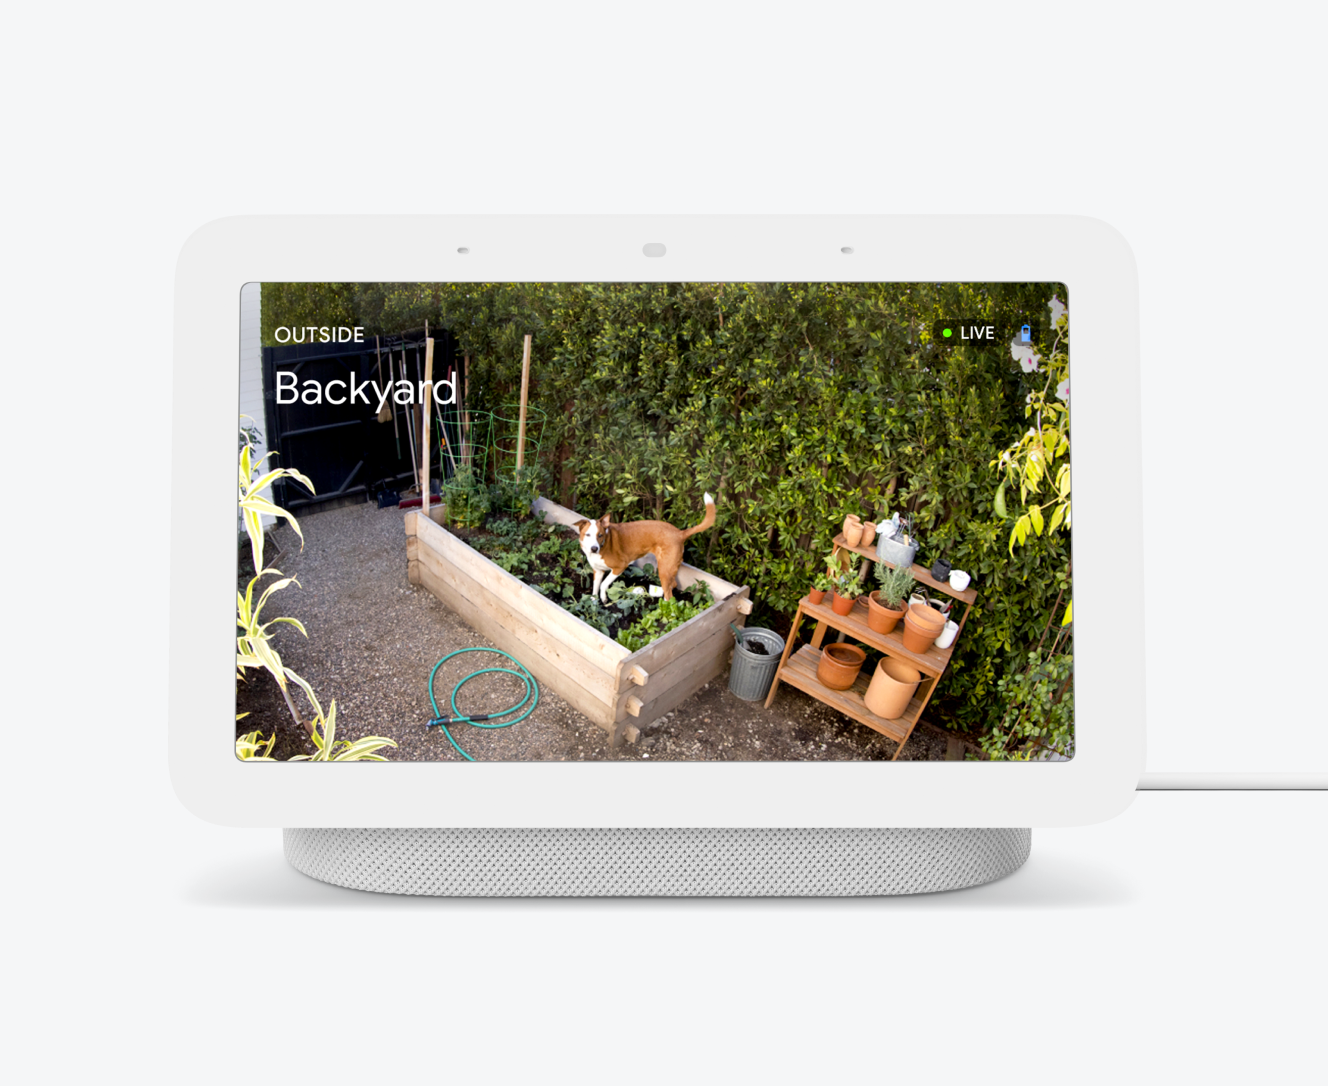 Outdoor Google Nest Cam footage shown on a laptop